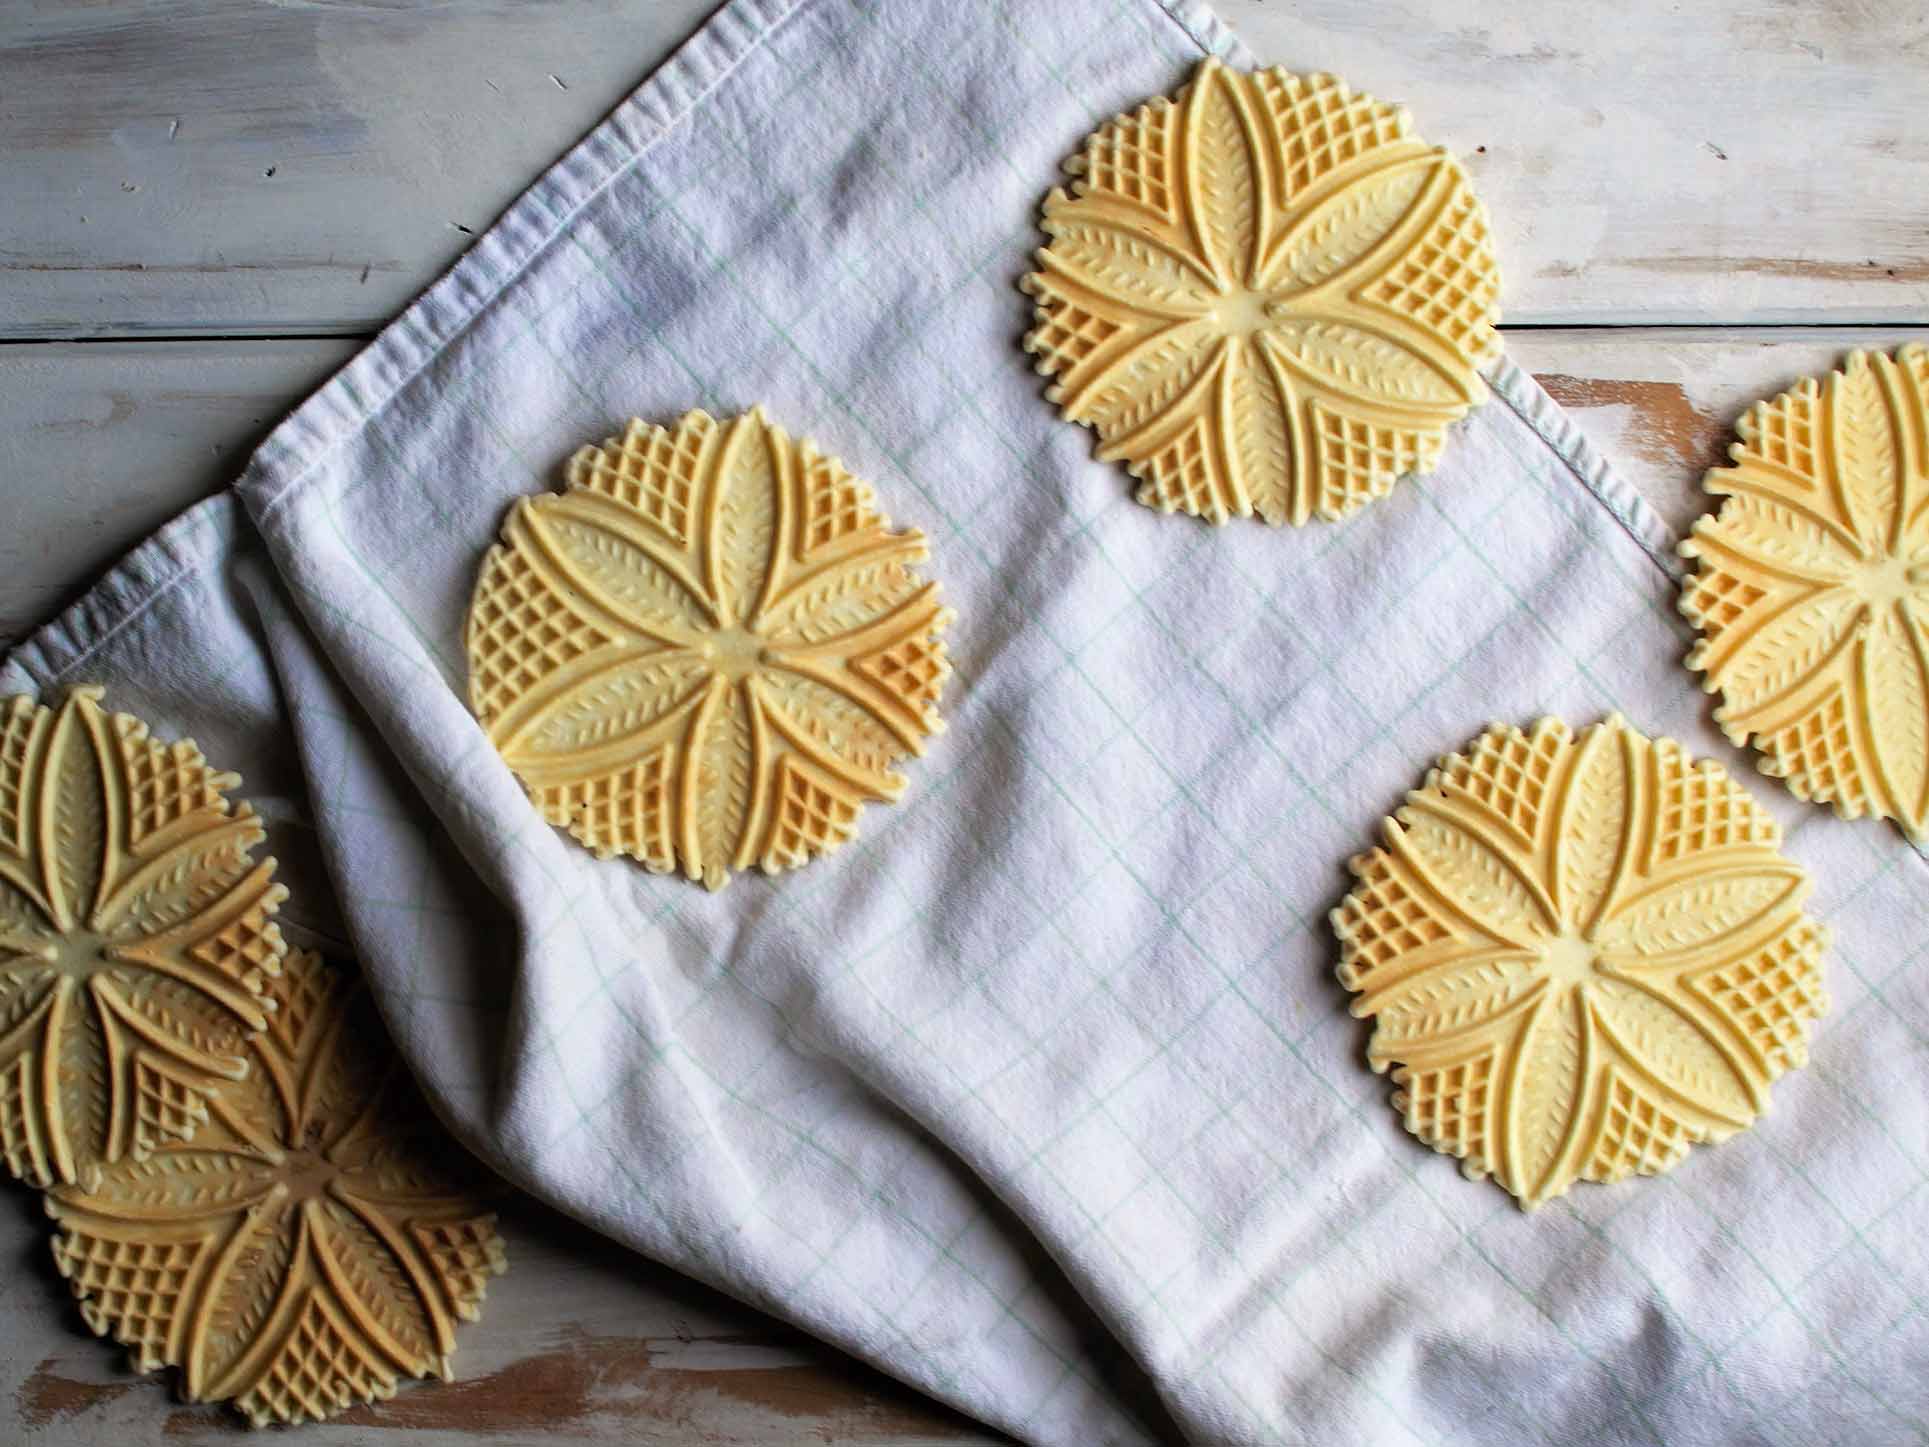 griddled cookies on a white towel.